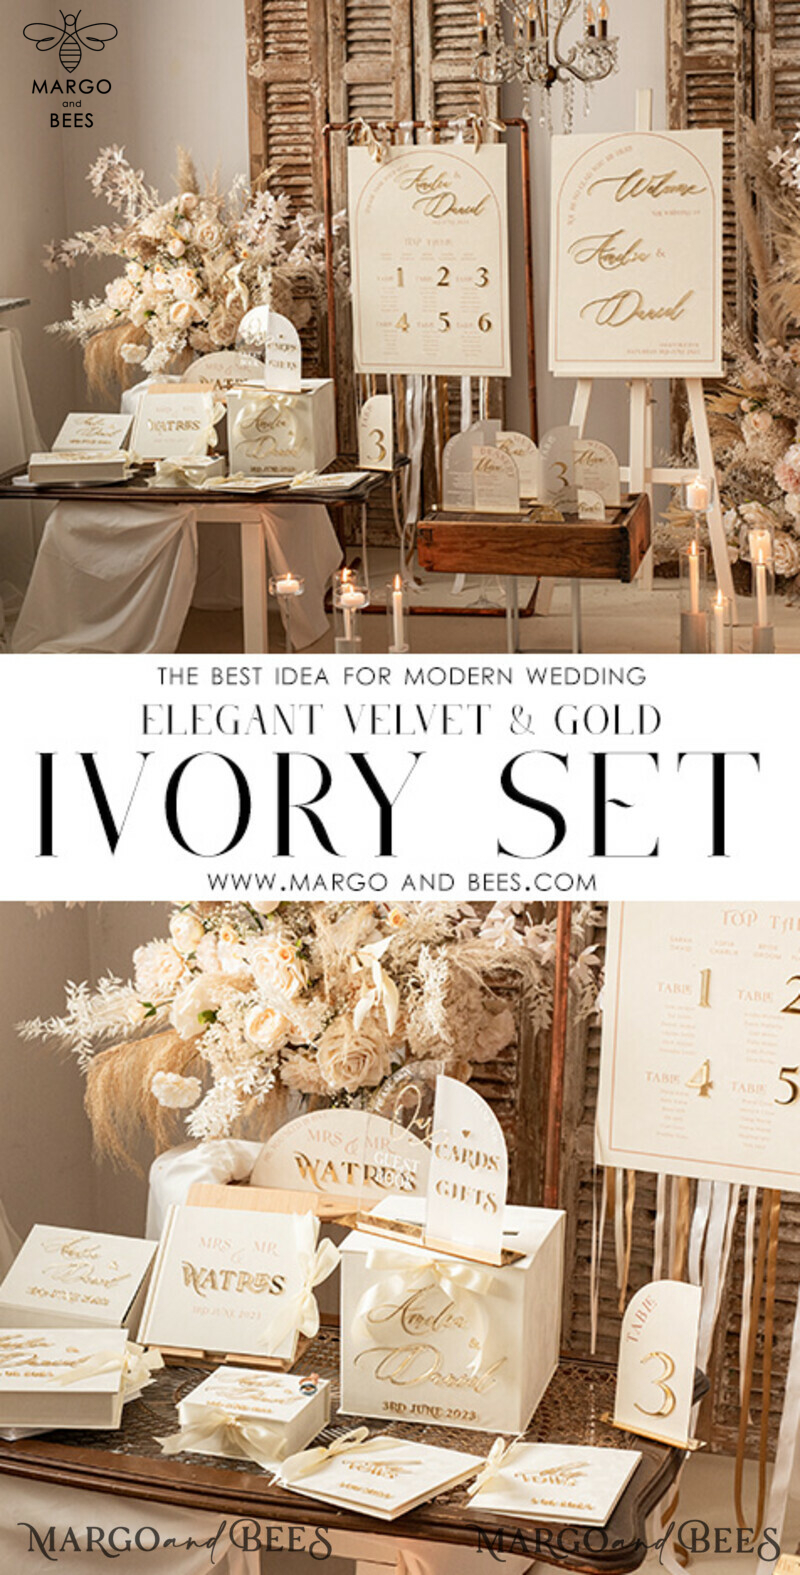 Luxury Ivory Wedding Ring Boxes: His and Hers Velvet Golden Double Box for a Garden Wedding-7